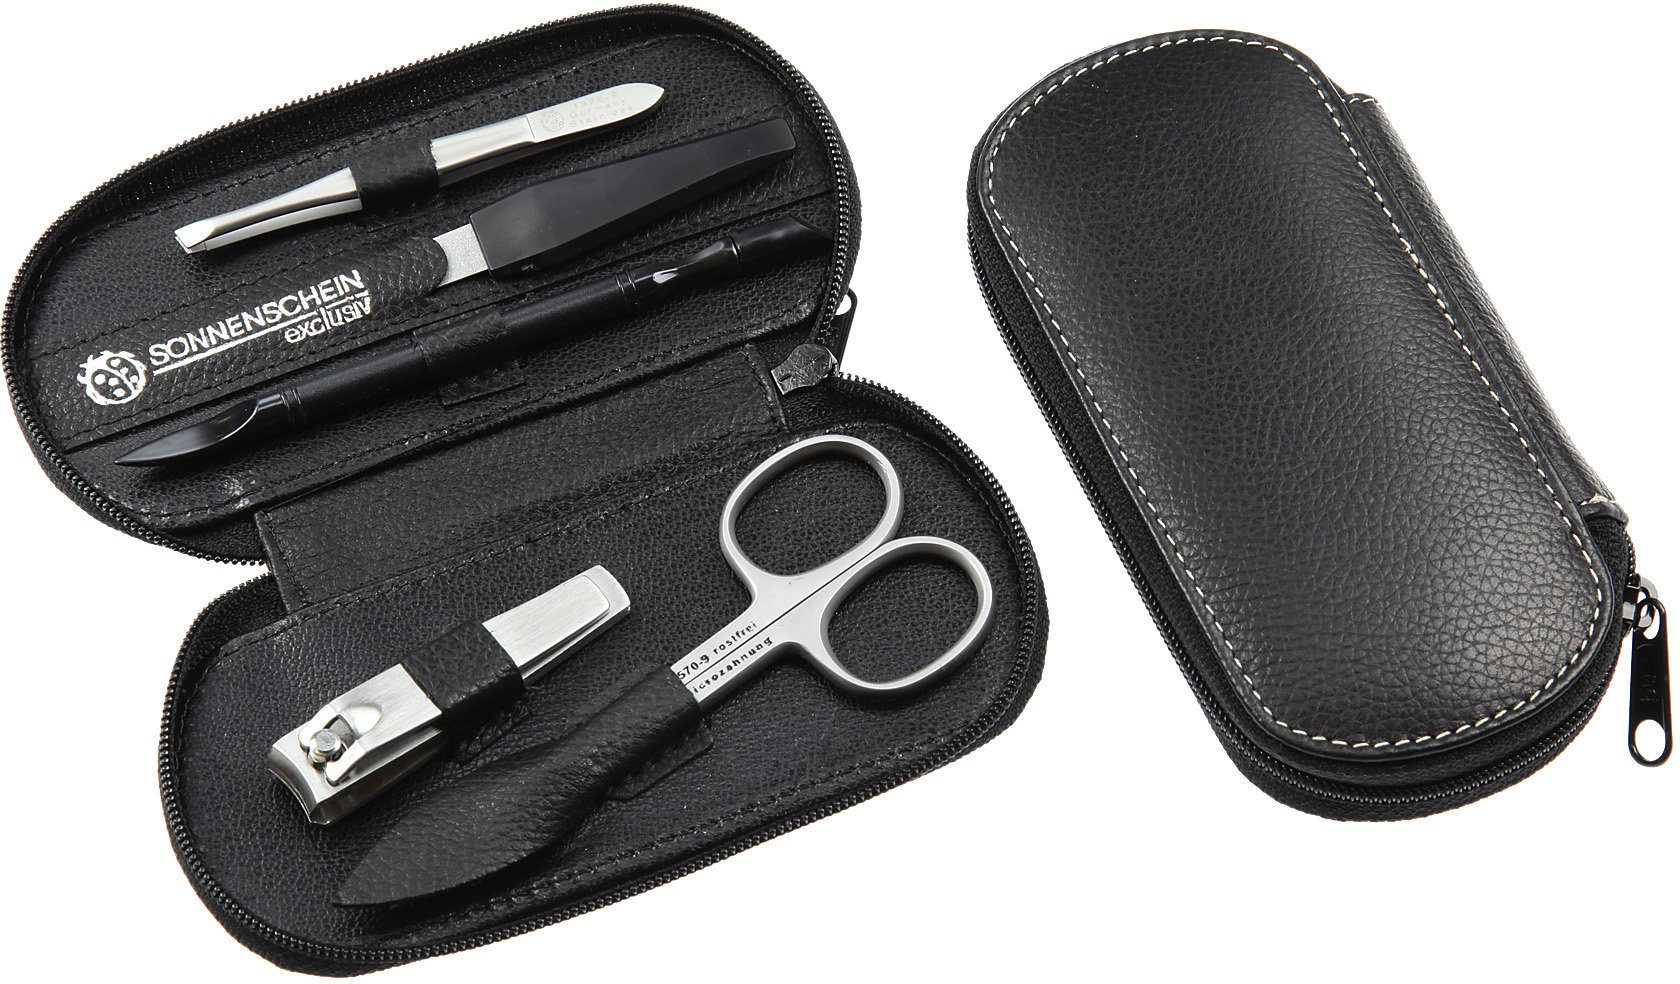 Accessory for Sewing Hans Kniebes 5 Pieces Manicure Set 4310-0902